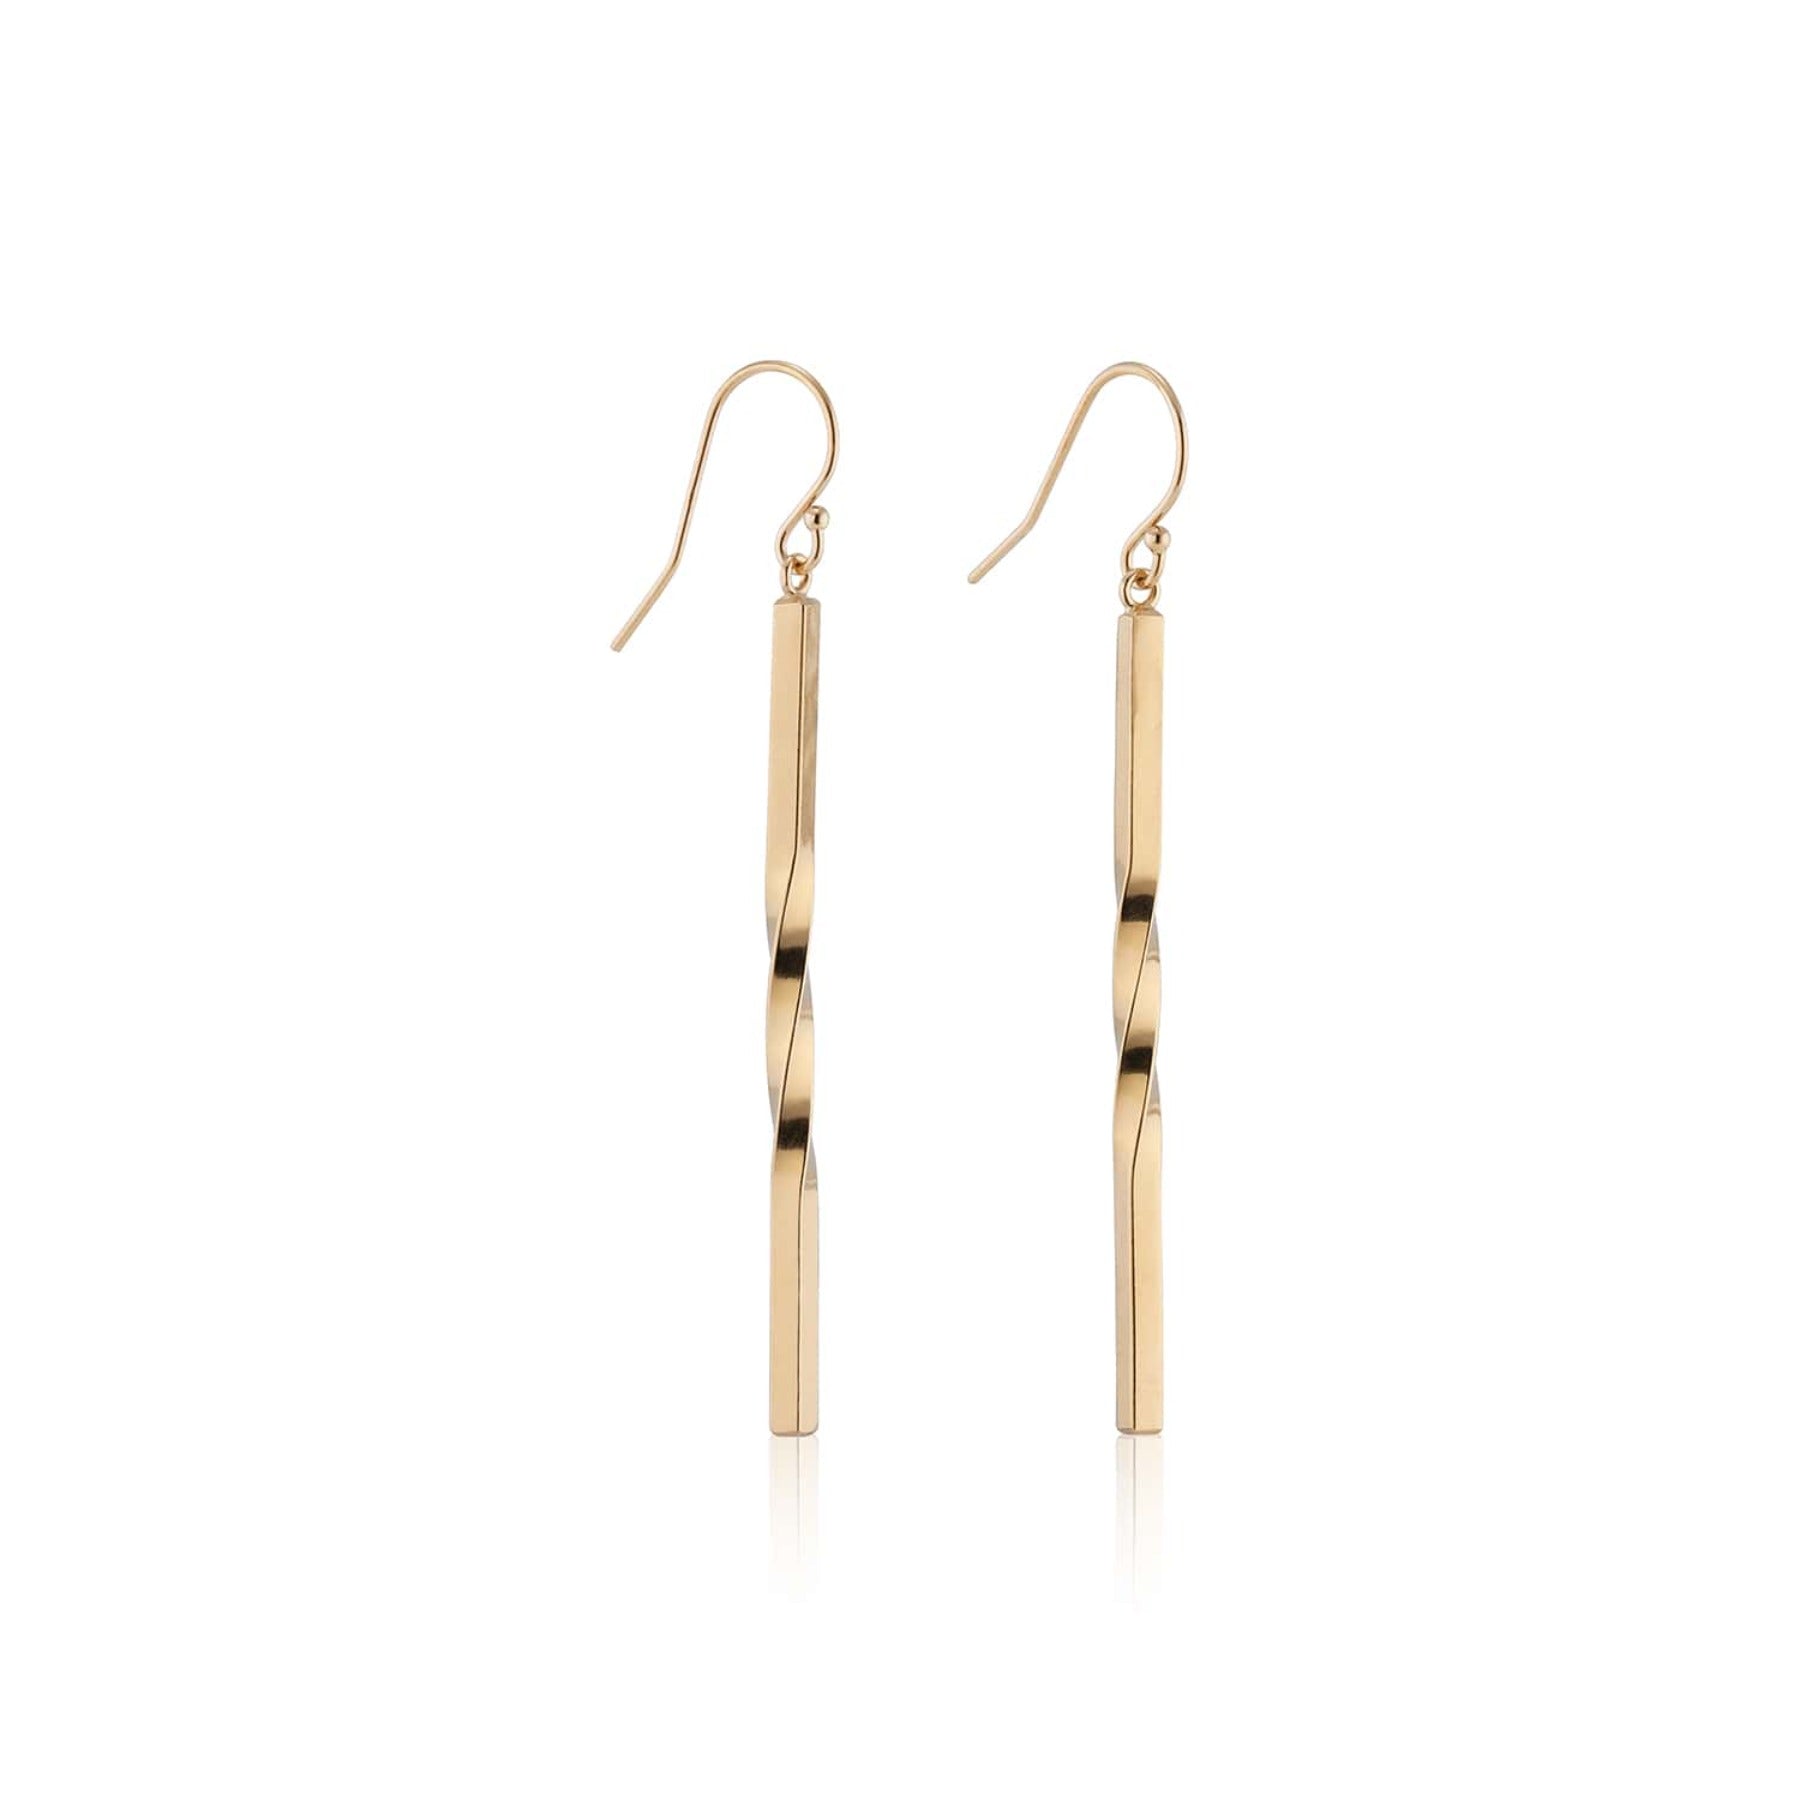 Minimalist vertical bar-shaped earrings with a single twist in the center and a fish hook ear wire in 18k gold vermeil.